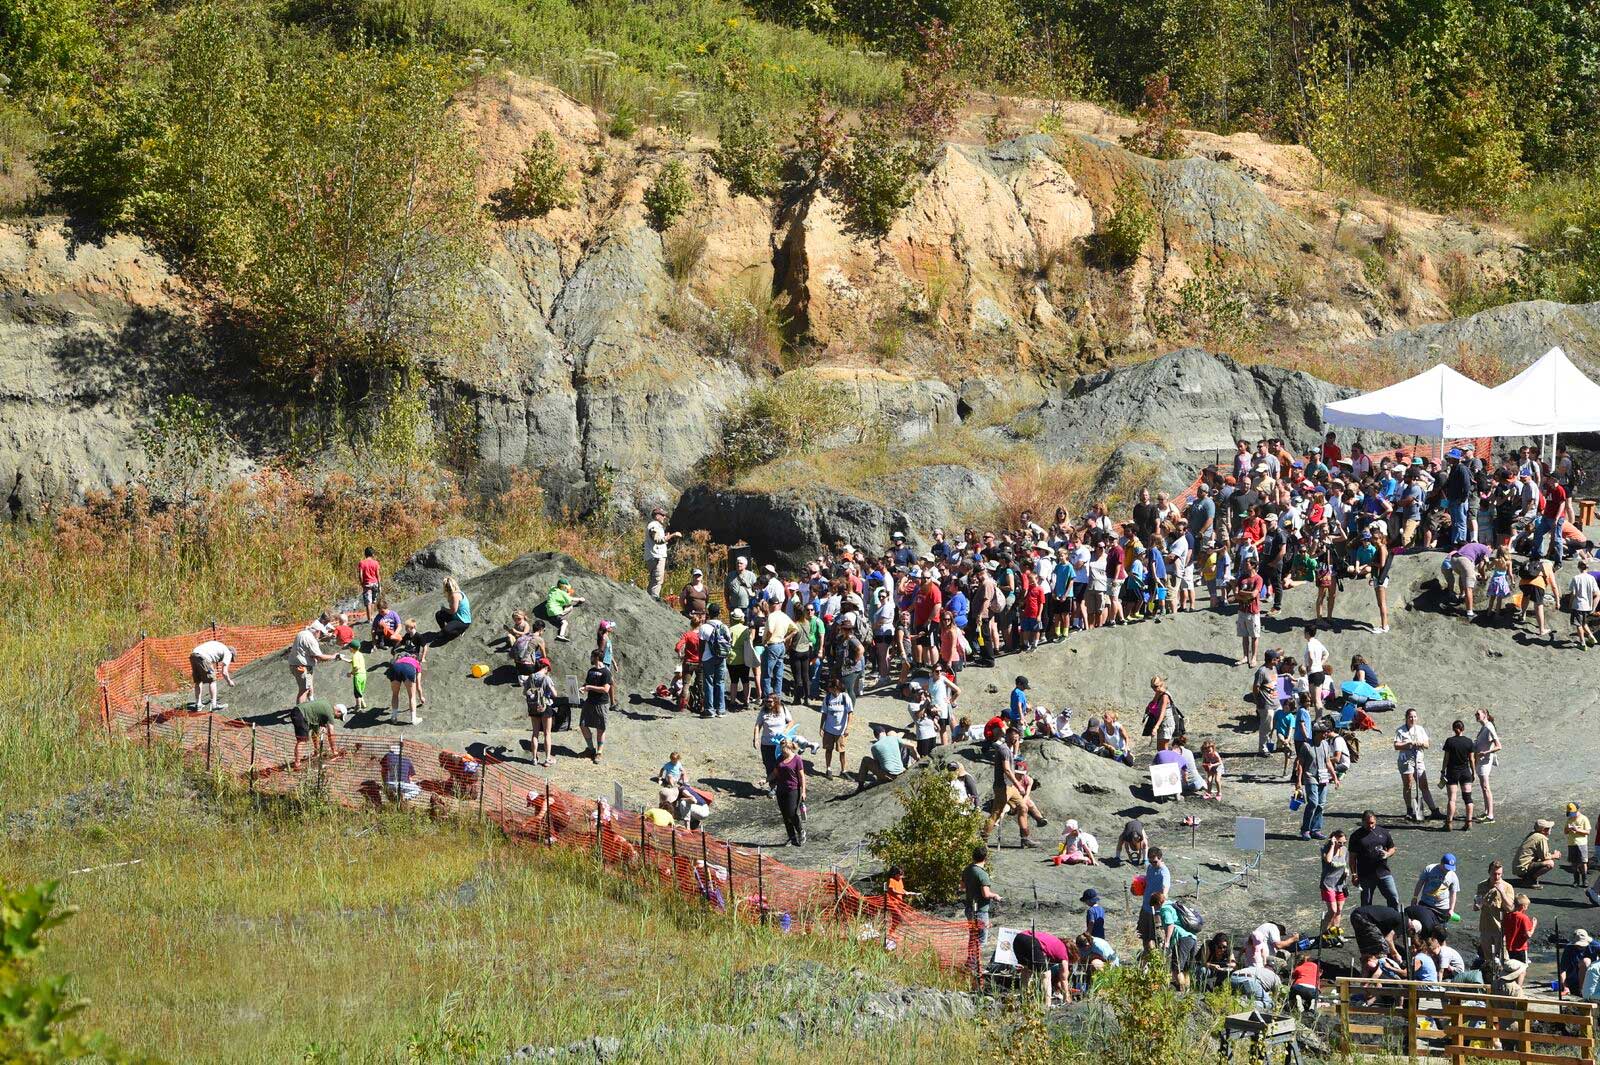 Photograph of Edelman Fossil Park, also called the Inversand Site, in Mantua, New Jersey. The photo shows a crow of people lined up to look for fossils in piles of sediment on the floor of an old quarry. In the background, the eroded walls of the quarry appear greenish gray near their bases, tan above.